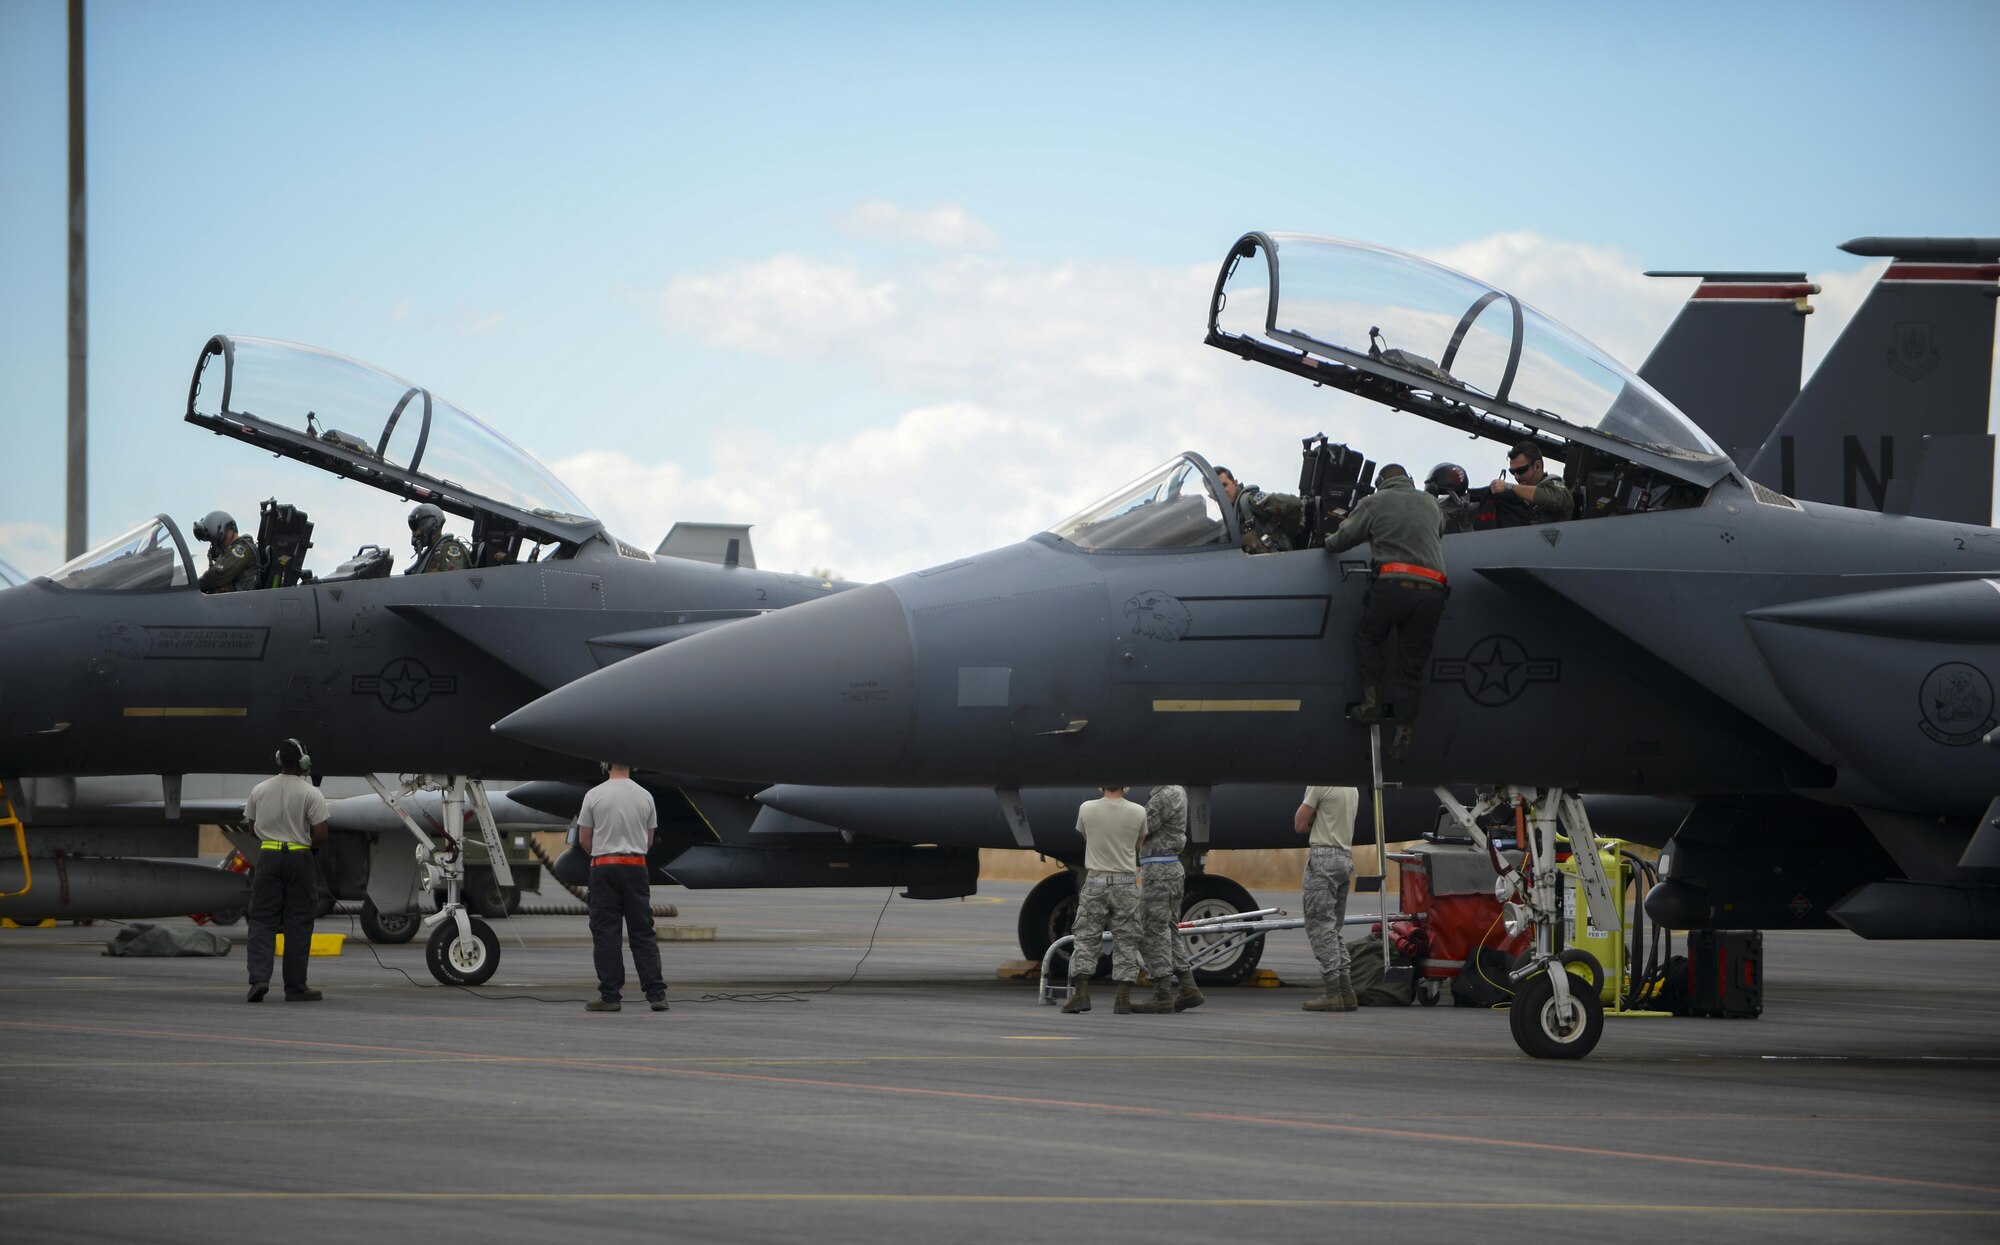 Members of the 494th Air Craft Maintenance Unit prepare F-15E Strike Eagles for a sortie in support of Tactical Leadership Programme 16-3 at Los Llanos Air Base, Spain Sep. 14, 2016. The training prepares NATO and allied forces’ flight leaders to be mission commanders, lead coalition force air strike packages, instruct allied flying and non-flying personnel in matters related to tactical composite air operations, and provide tactical air expertise to NATO agencies. (U.S. Air Force photo/ Staff Sgt. Emerson Nuñez)